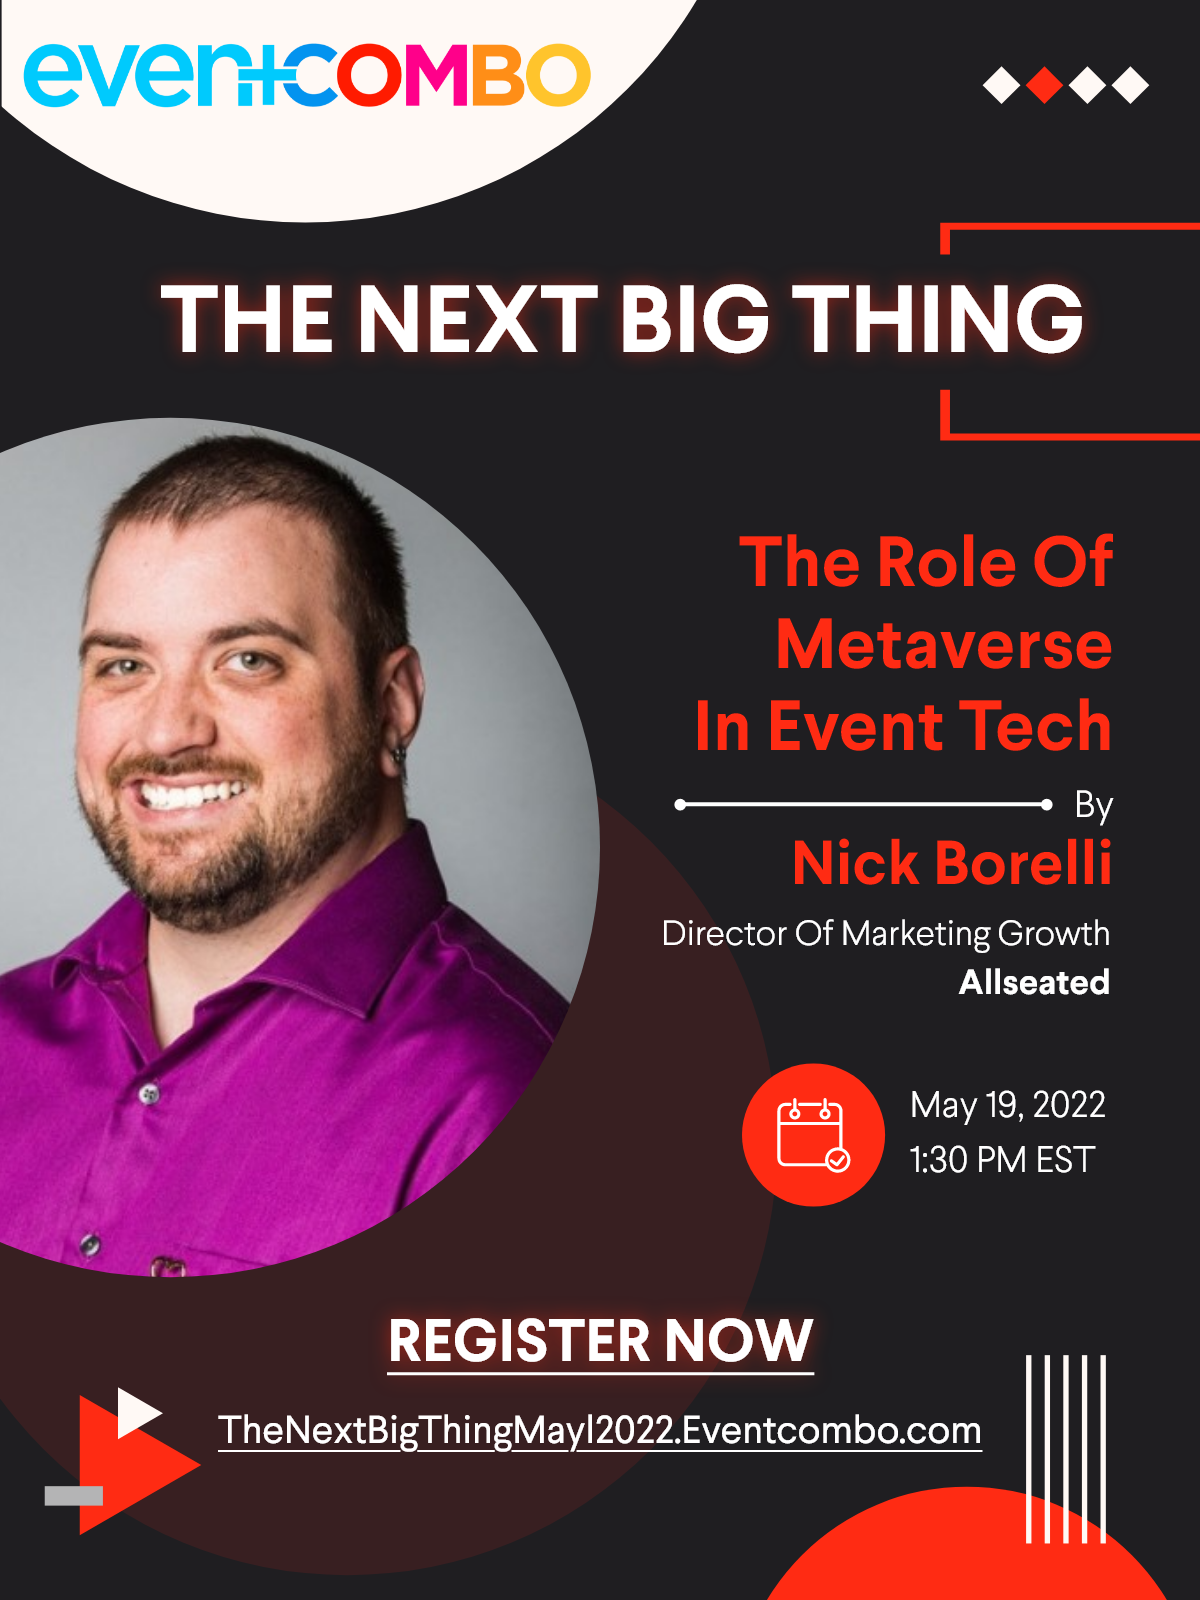 The Role of Metaverse in Event Tech with Nick Borelli | The Next Big Thing | A Webinar Series by Eventcombo